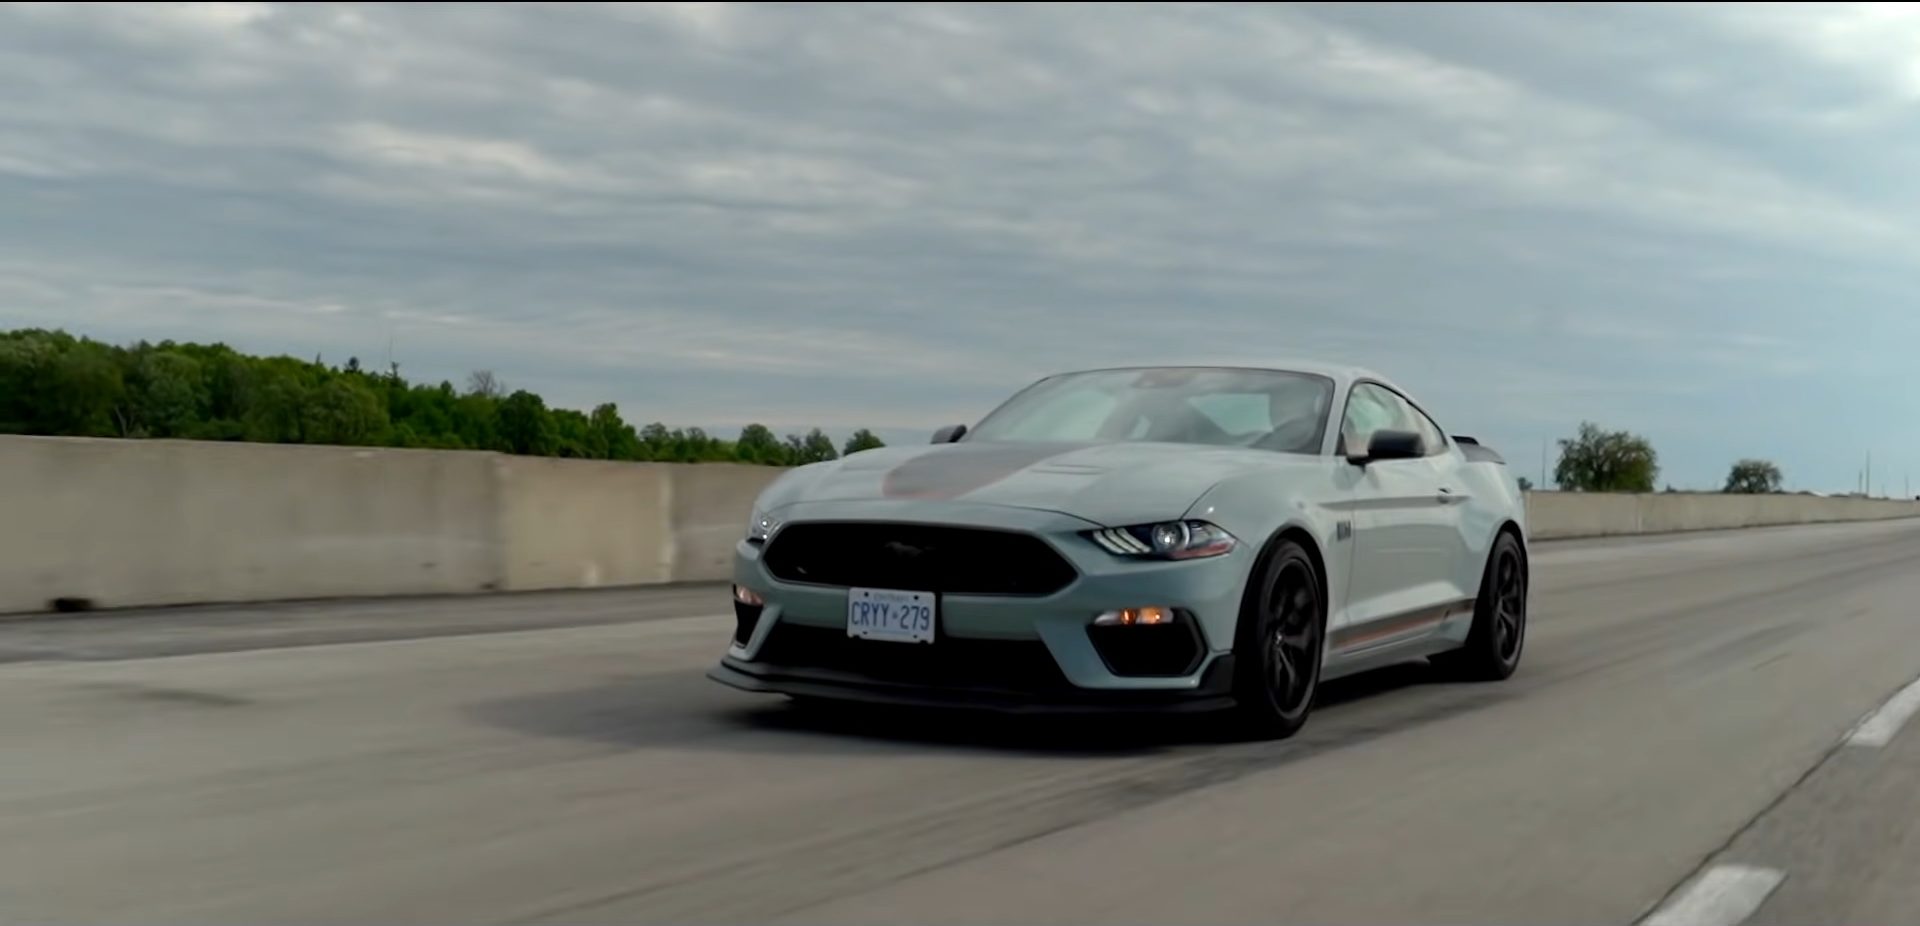 Comparing The 2021 Ford Mustang Mach 1 Against A 2021 BMW M4